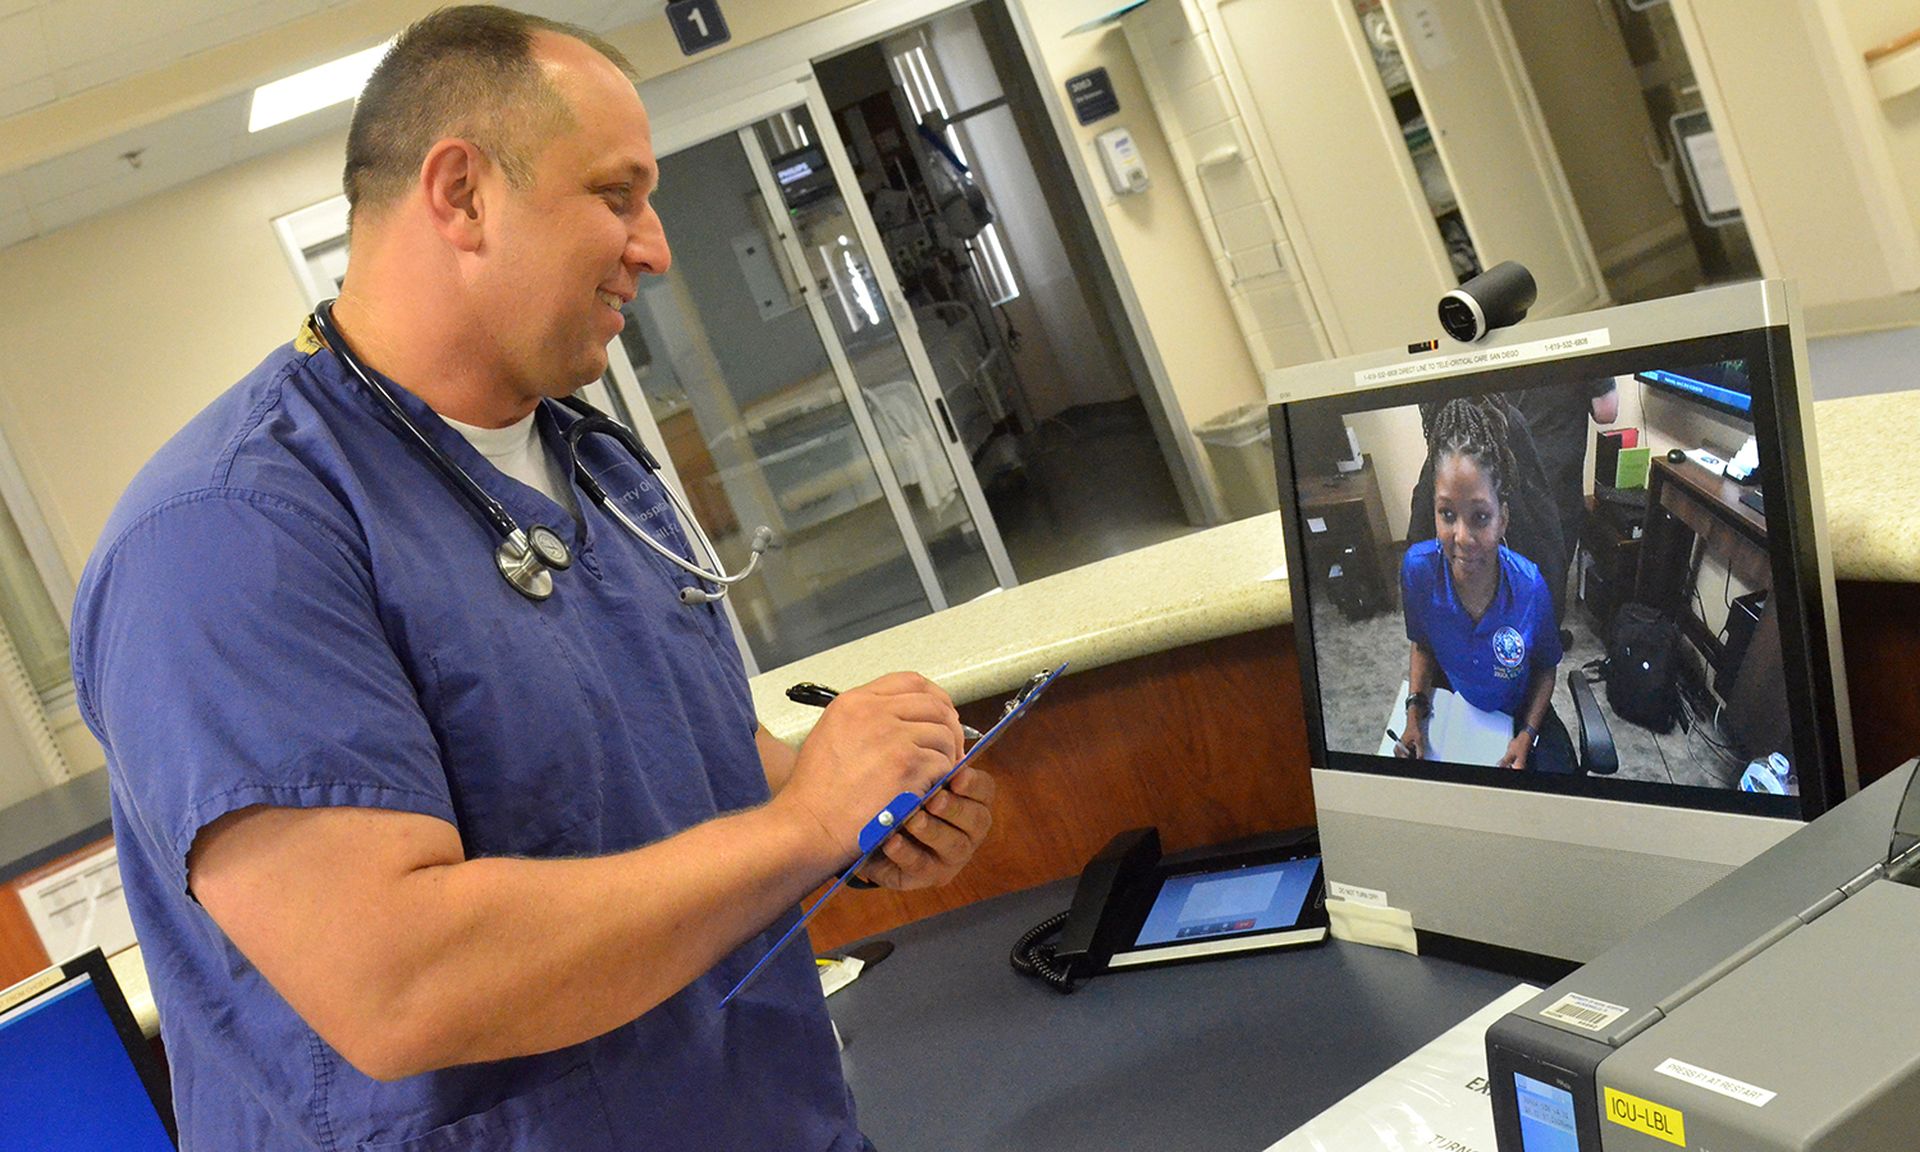 A nurse speaks with a nurse at a different hospital using telehealth equipment.